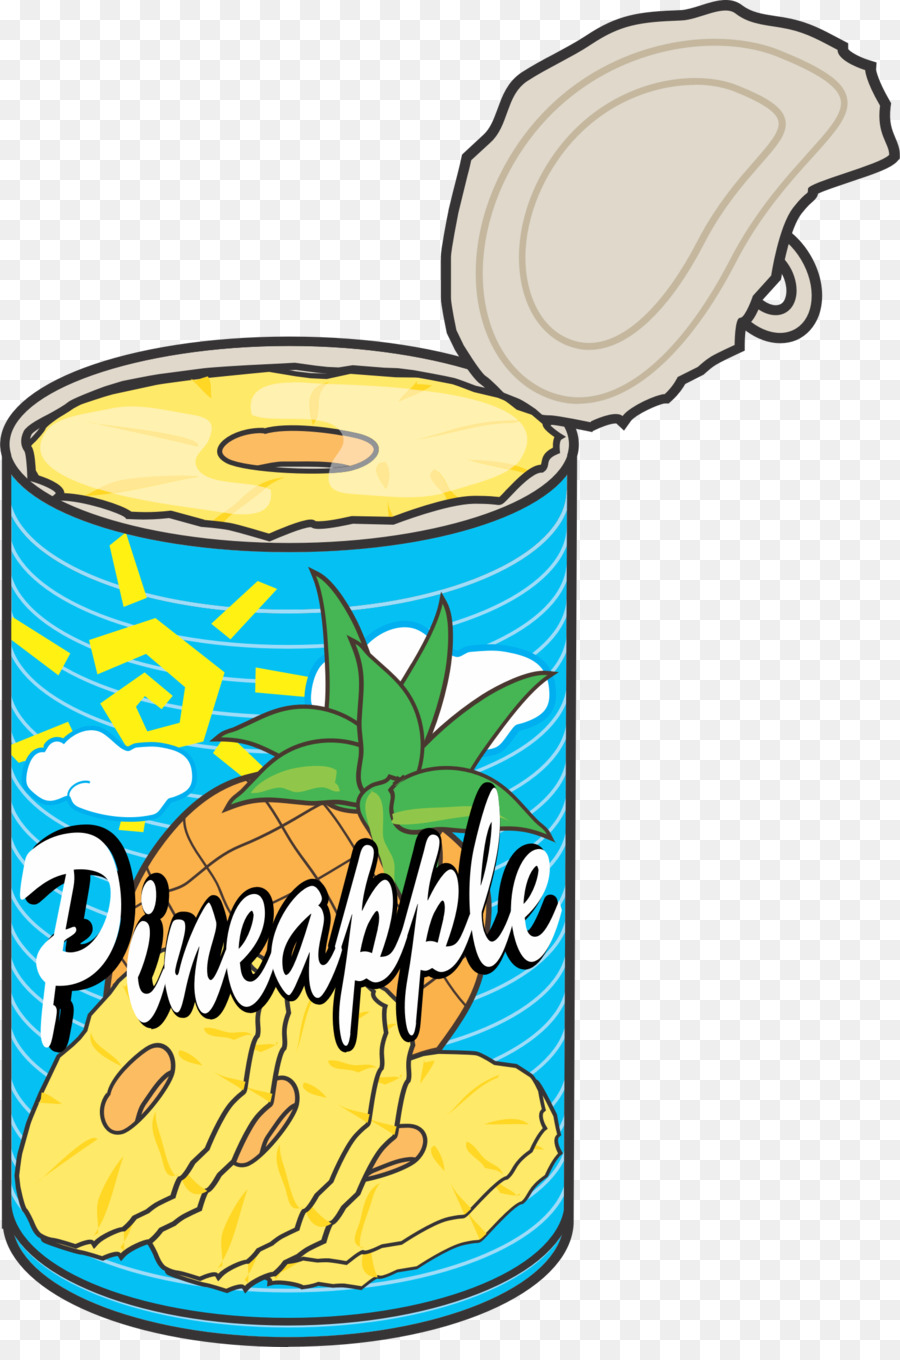 Ananas Canning Tin can Clip art - ananas.